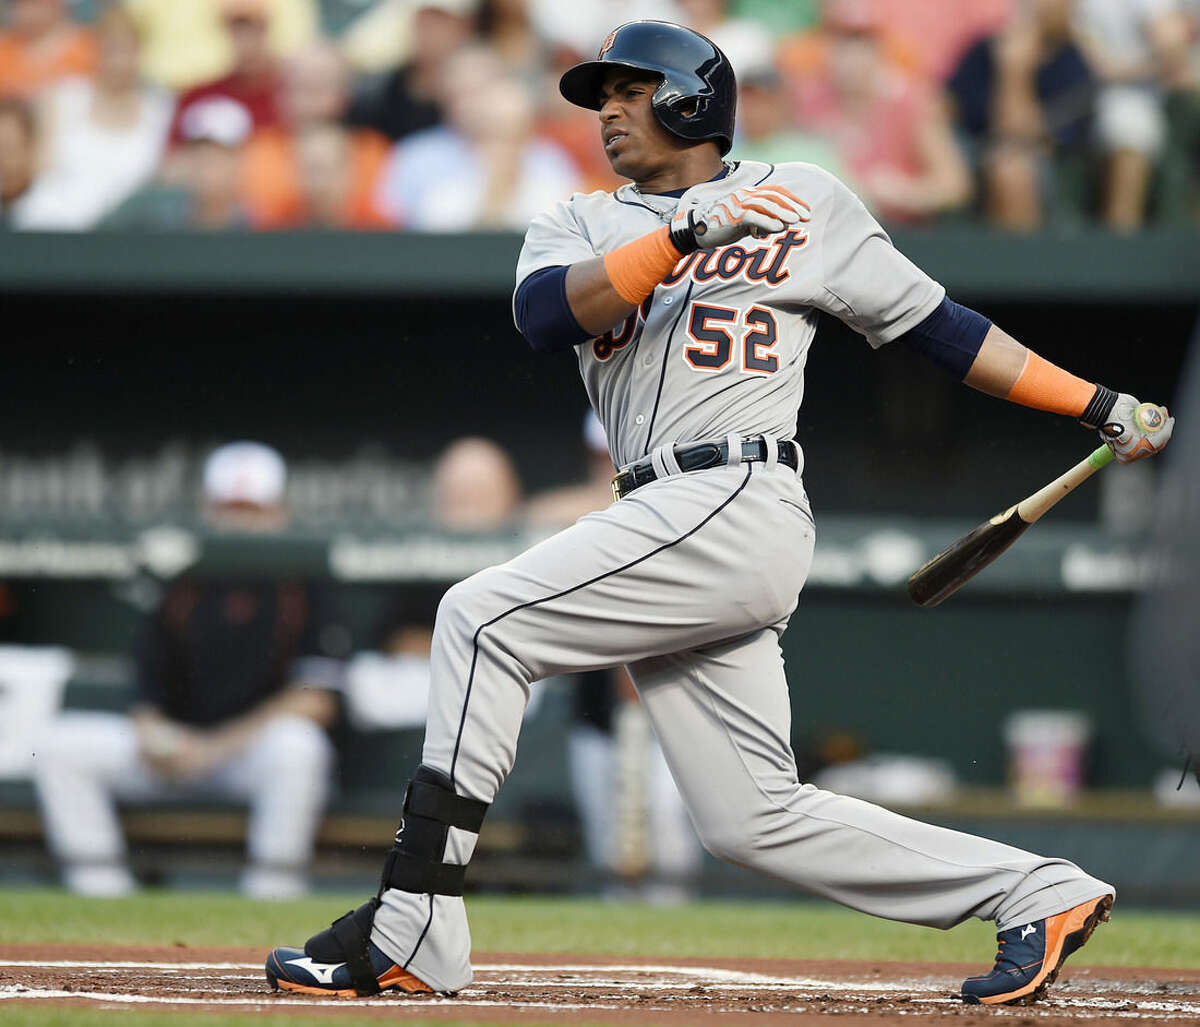 Detroit Tigers' Yoenis Cespedes follows through on a single against the Baltimore Orioles in the first inning of a baseball game, Thursday, July 30, 2015, in Baltimore.(AP Photo/Gail Burton)